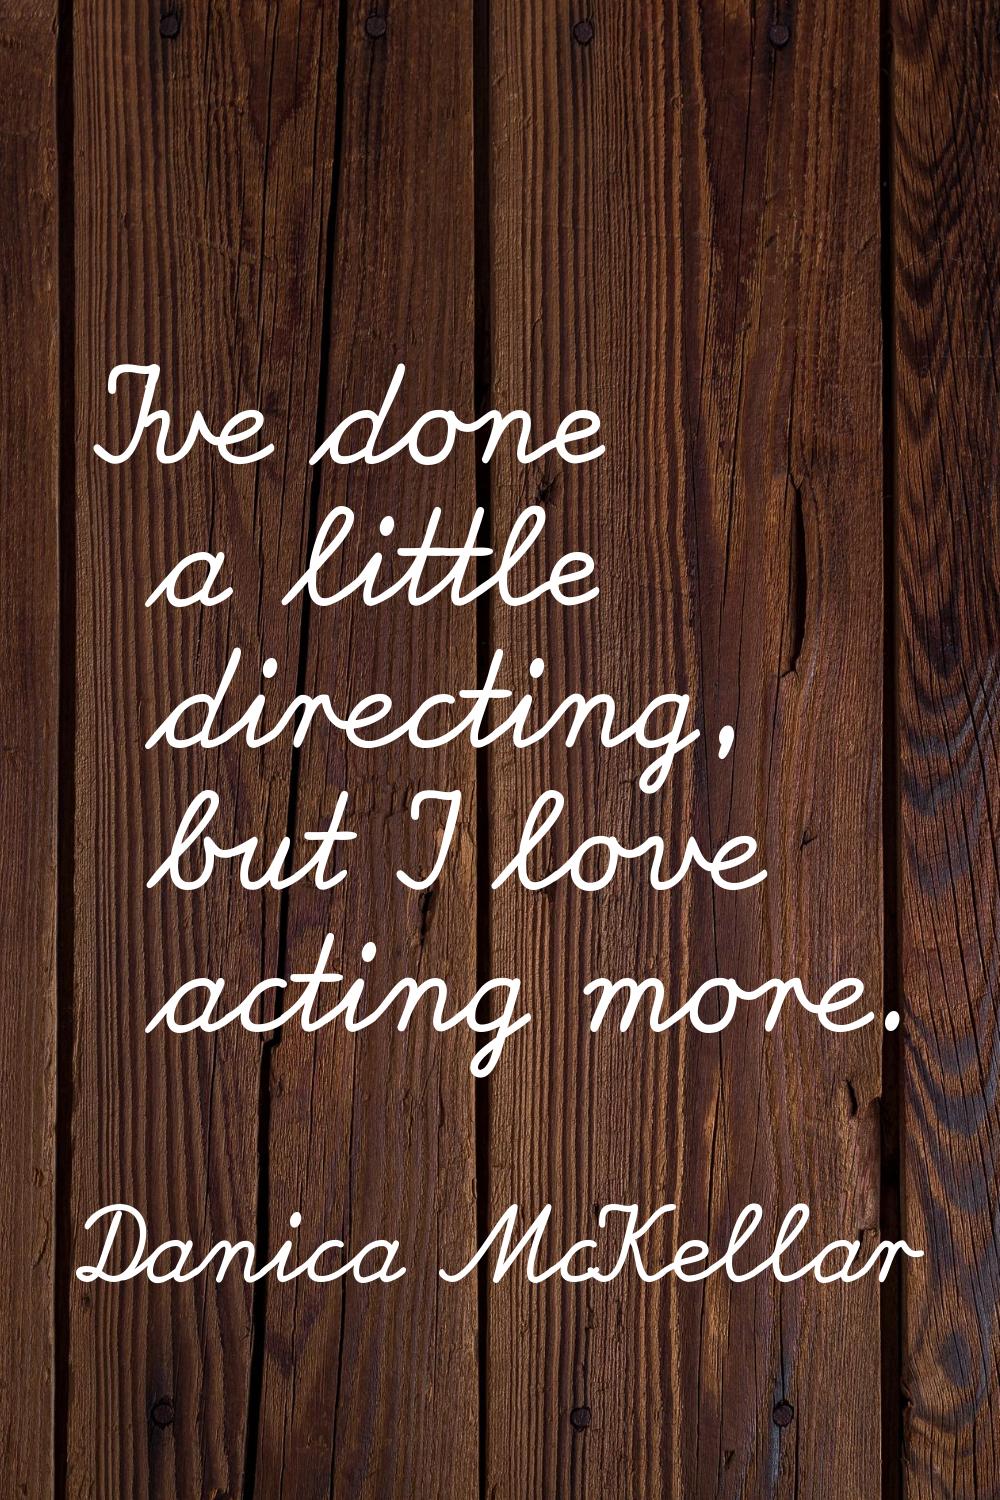 I've done a little directing, but I love acting more.